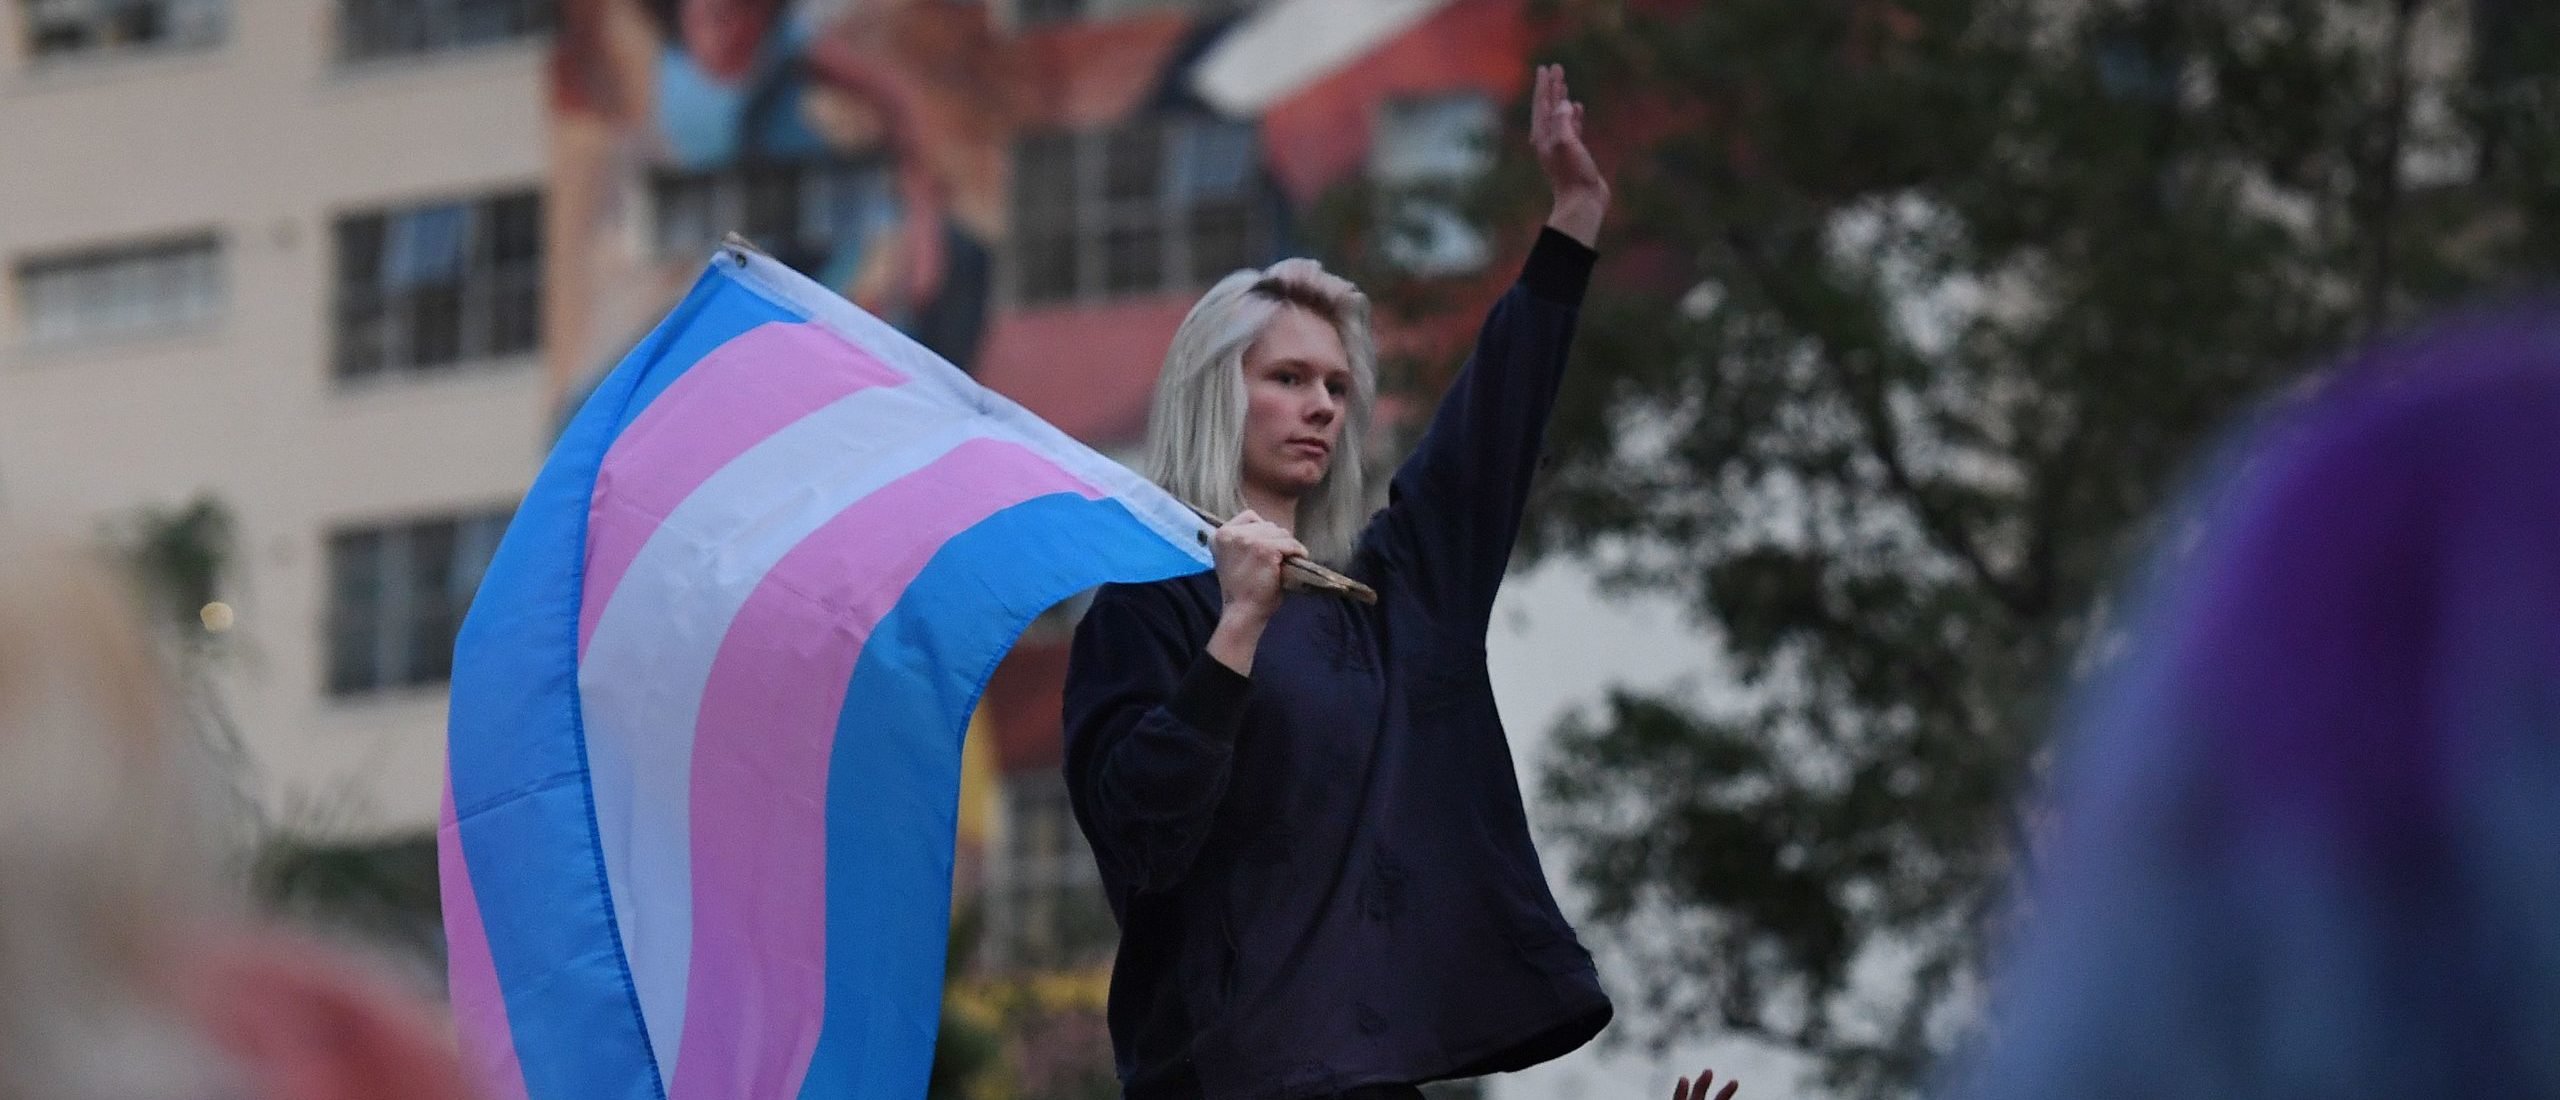 Members of the Transgender community and their supporters hold a rally and march to City Hall before the mid-term elections to protest against what they say are continual attacks from the Trump administration, in Los Angeles, California on November 2, 2018. (Photo by Mark RALSTON / AFP) (Photo credit should read MARK RALSTON/AFP via Getty Images)